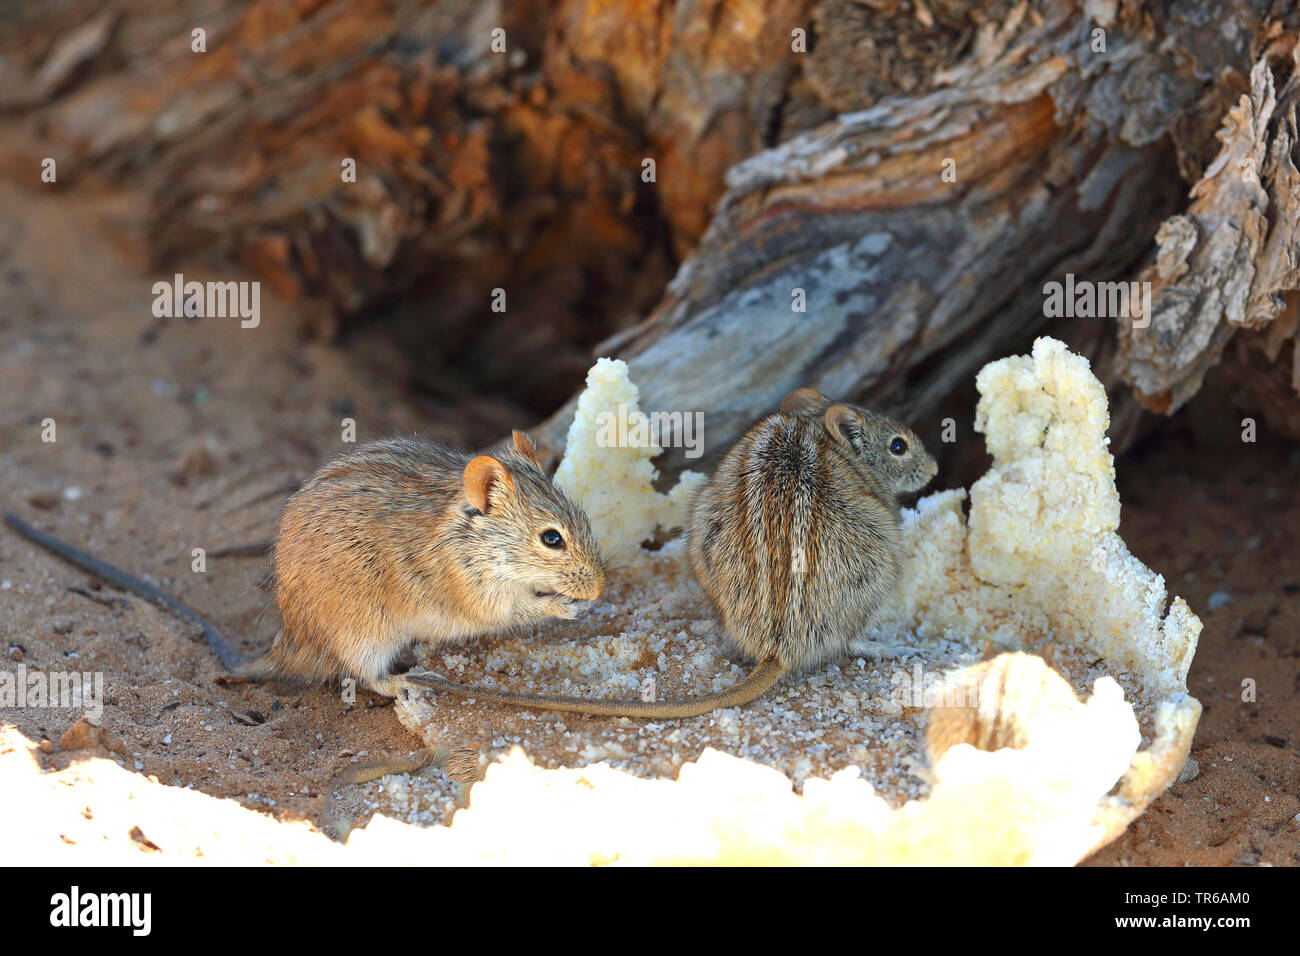 Stripped gras mouse (Lemniscomys barbarus), two mice feeding on bread, South Africa, Klaarstrom Stock Photo